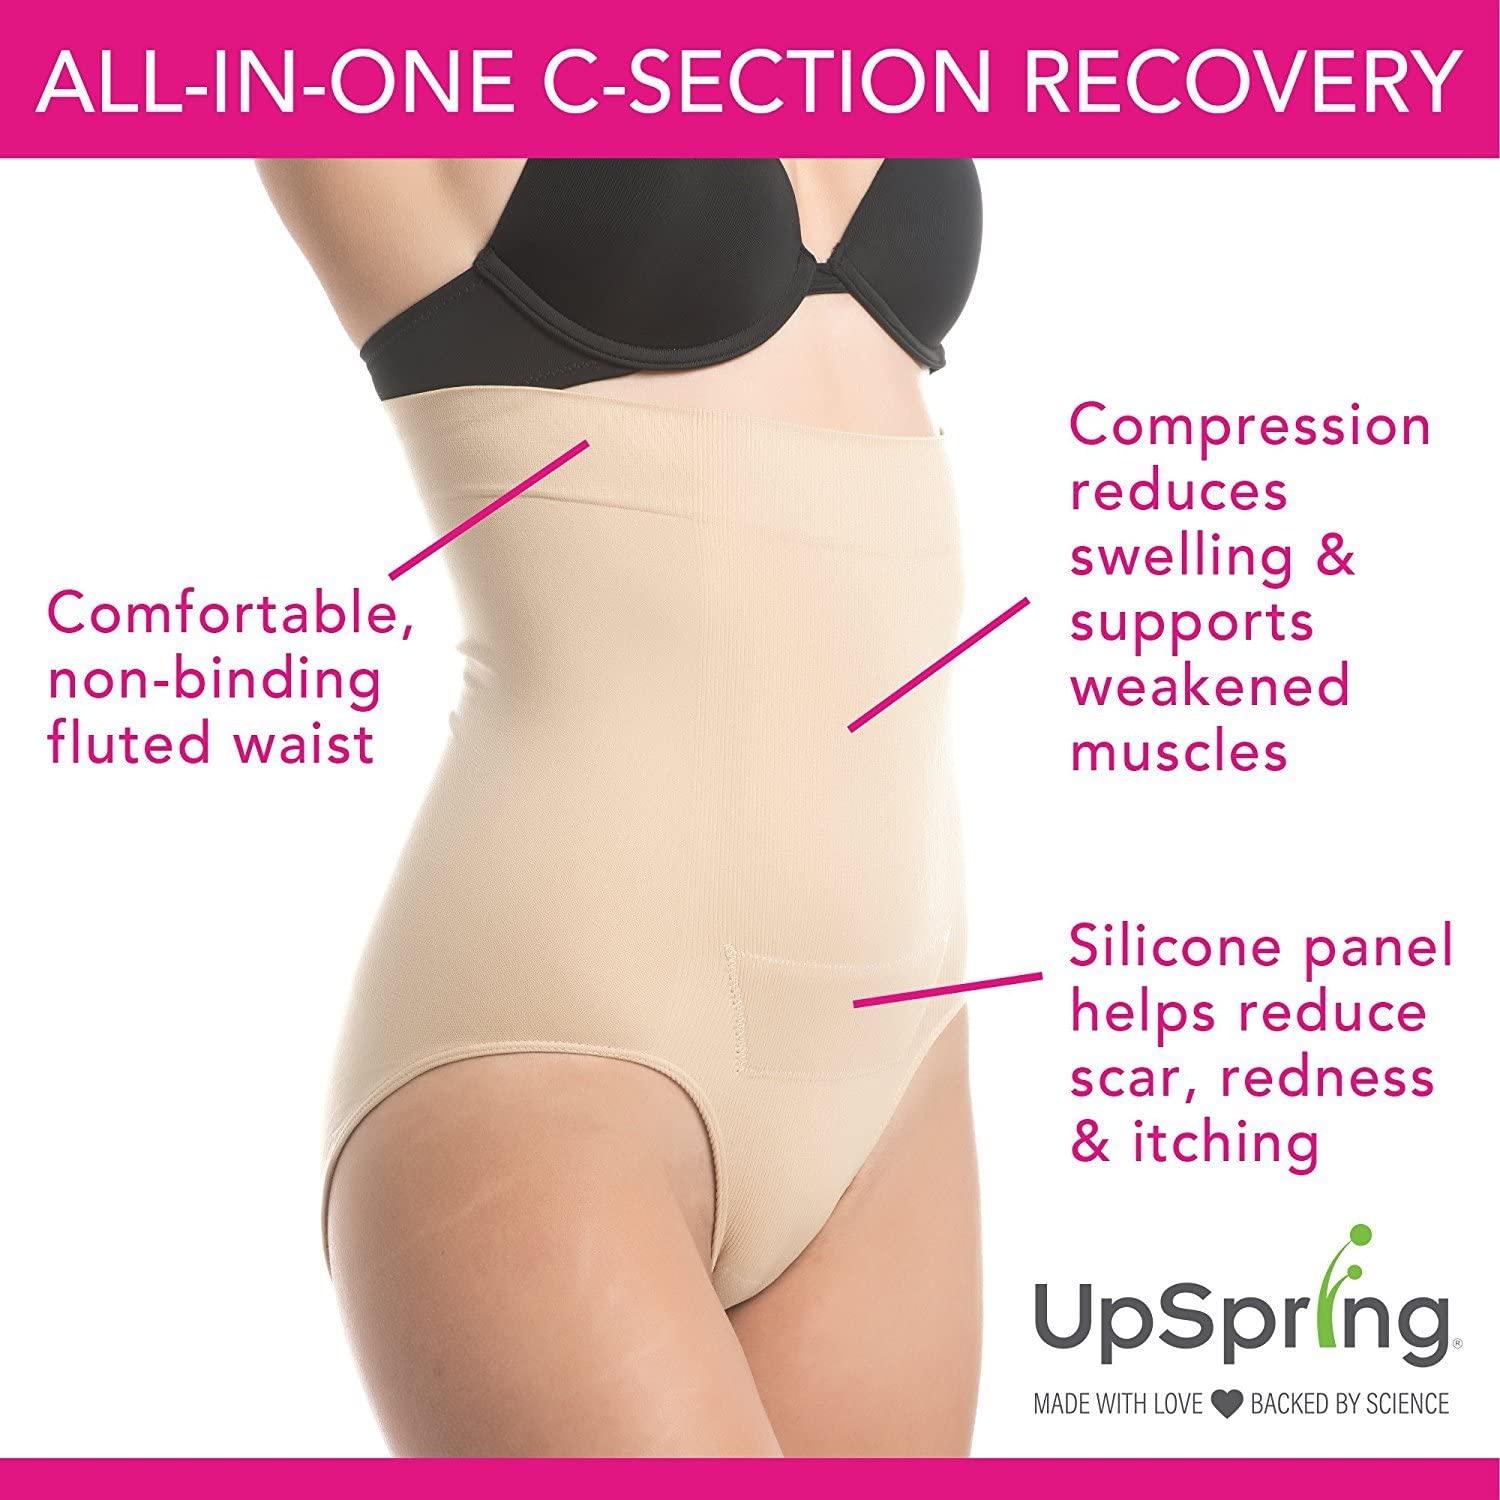 C-Panty Classic Waist C-Section Recovery Underwear in Black by UpSpring